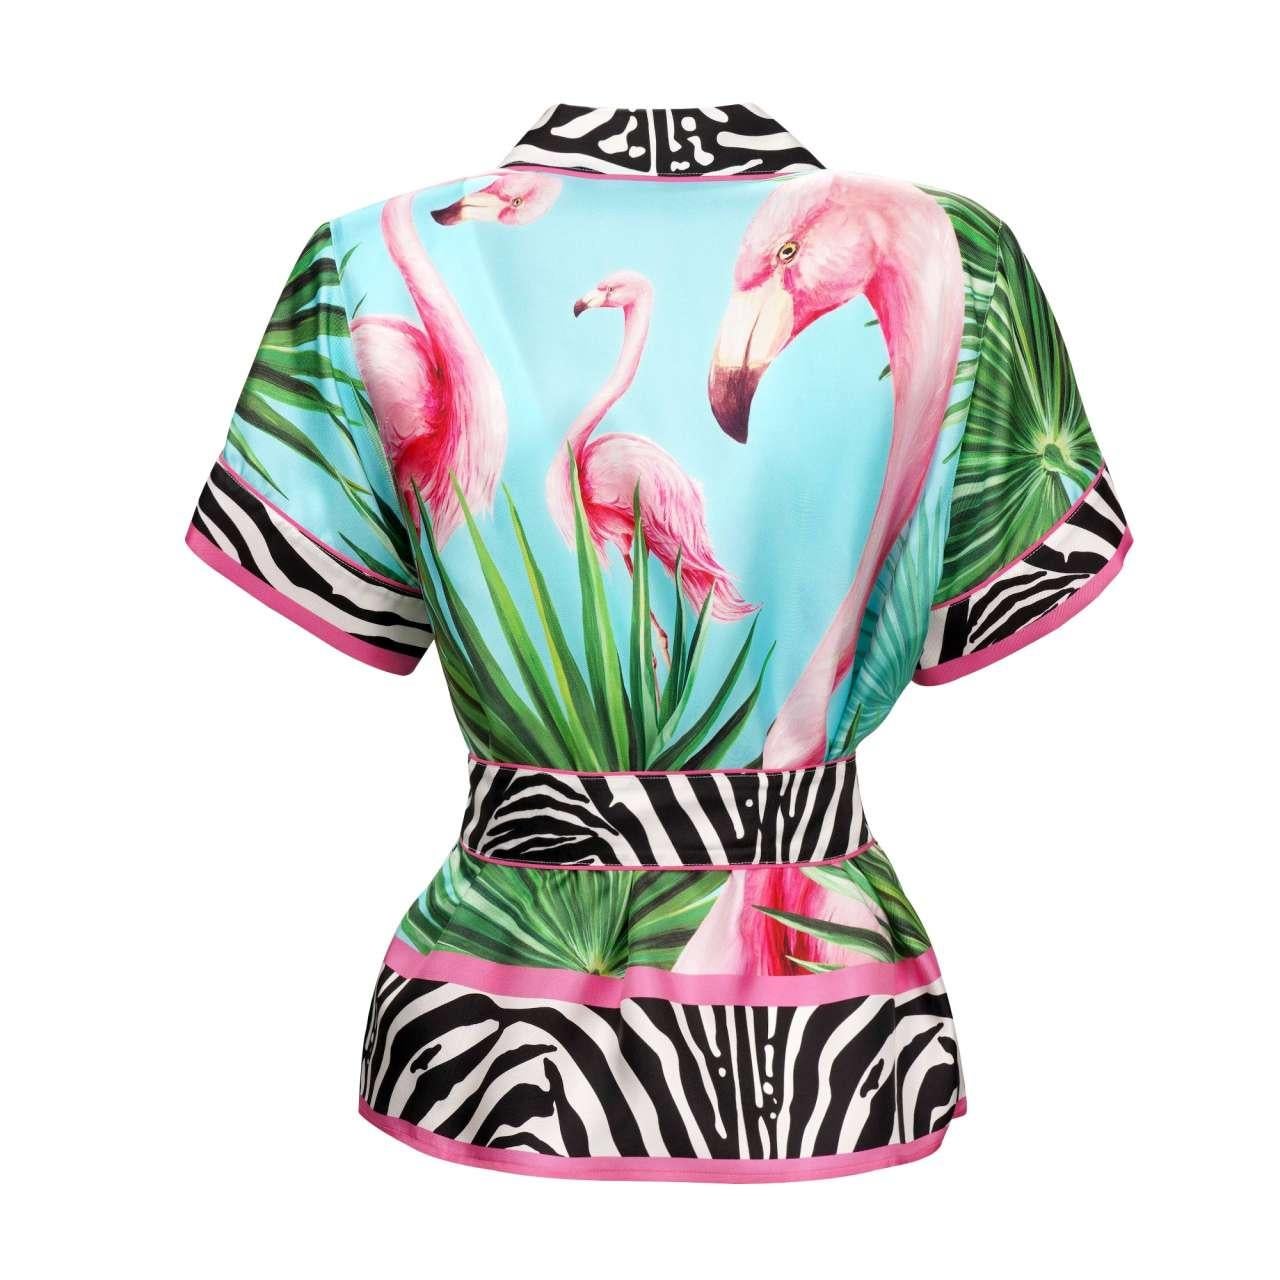 D&G - DJ Khaled Silk Flamingo Zebra Shirt Blouse with Sunglasses and CD 38 In Excellent Condition For Sale In Erkrath, DE